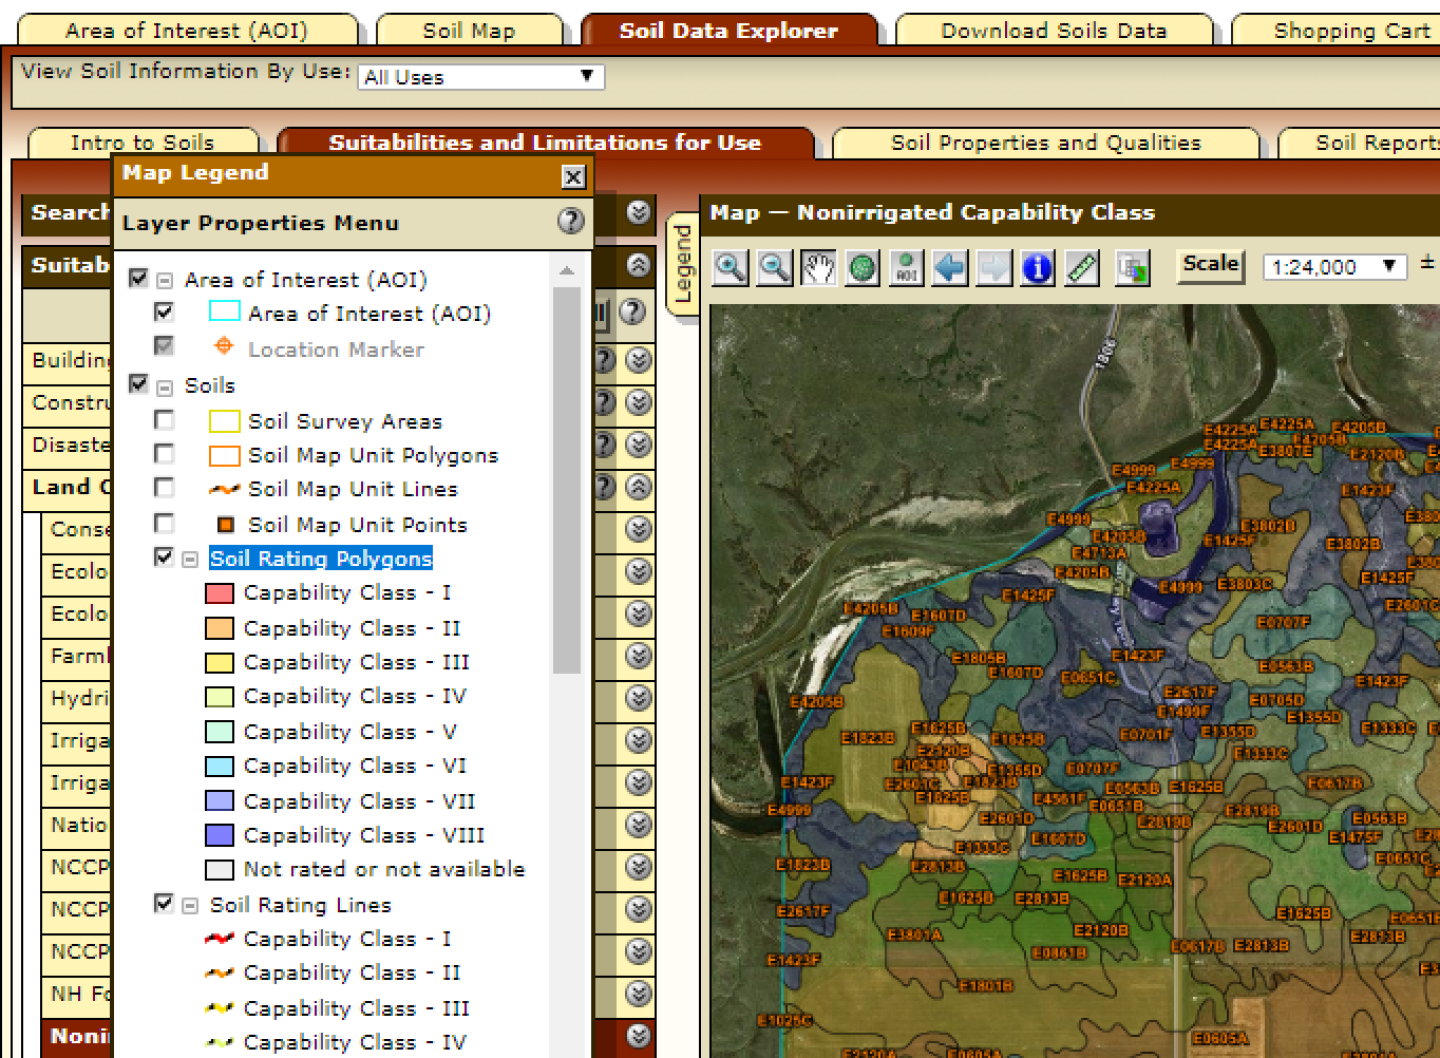 The layer opacity changes in the Legend, in on-screen Soil Rating maps, and in printed Soil Rating maps.